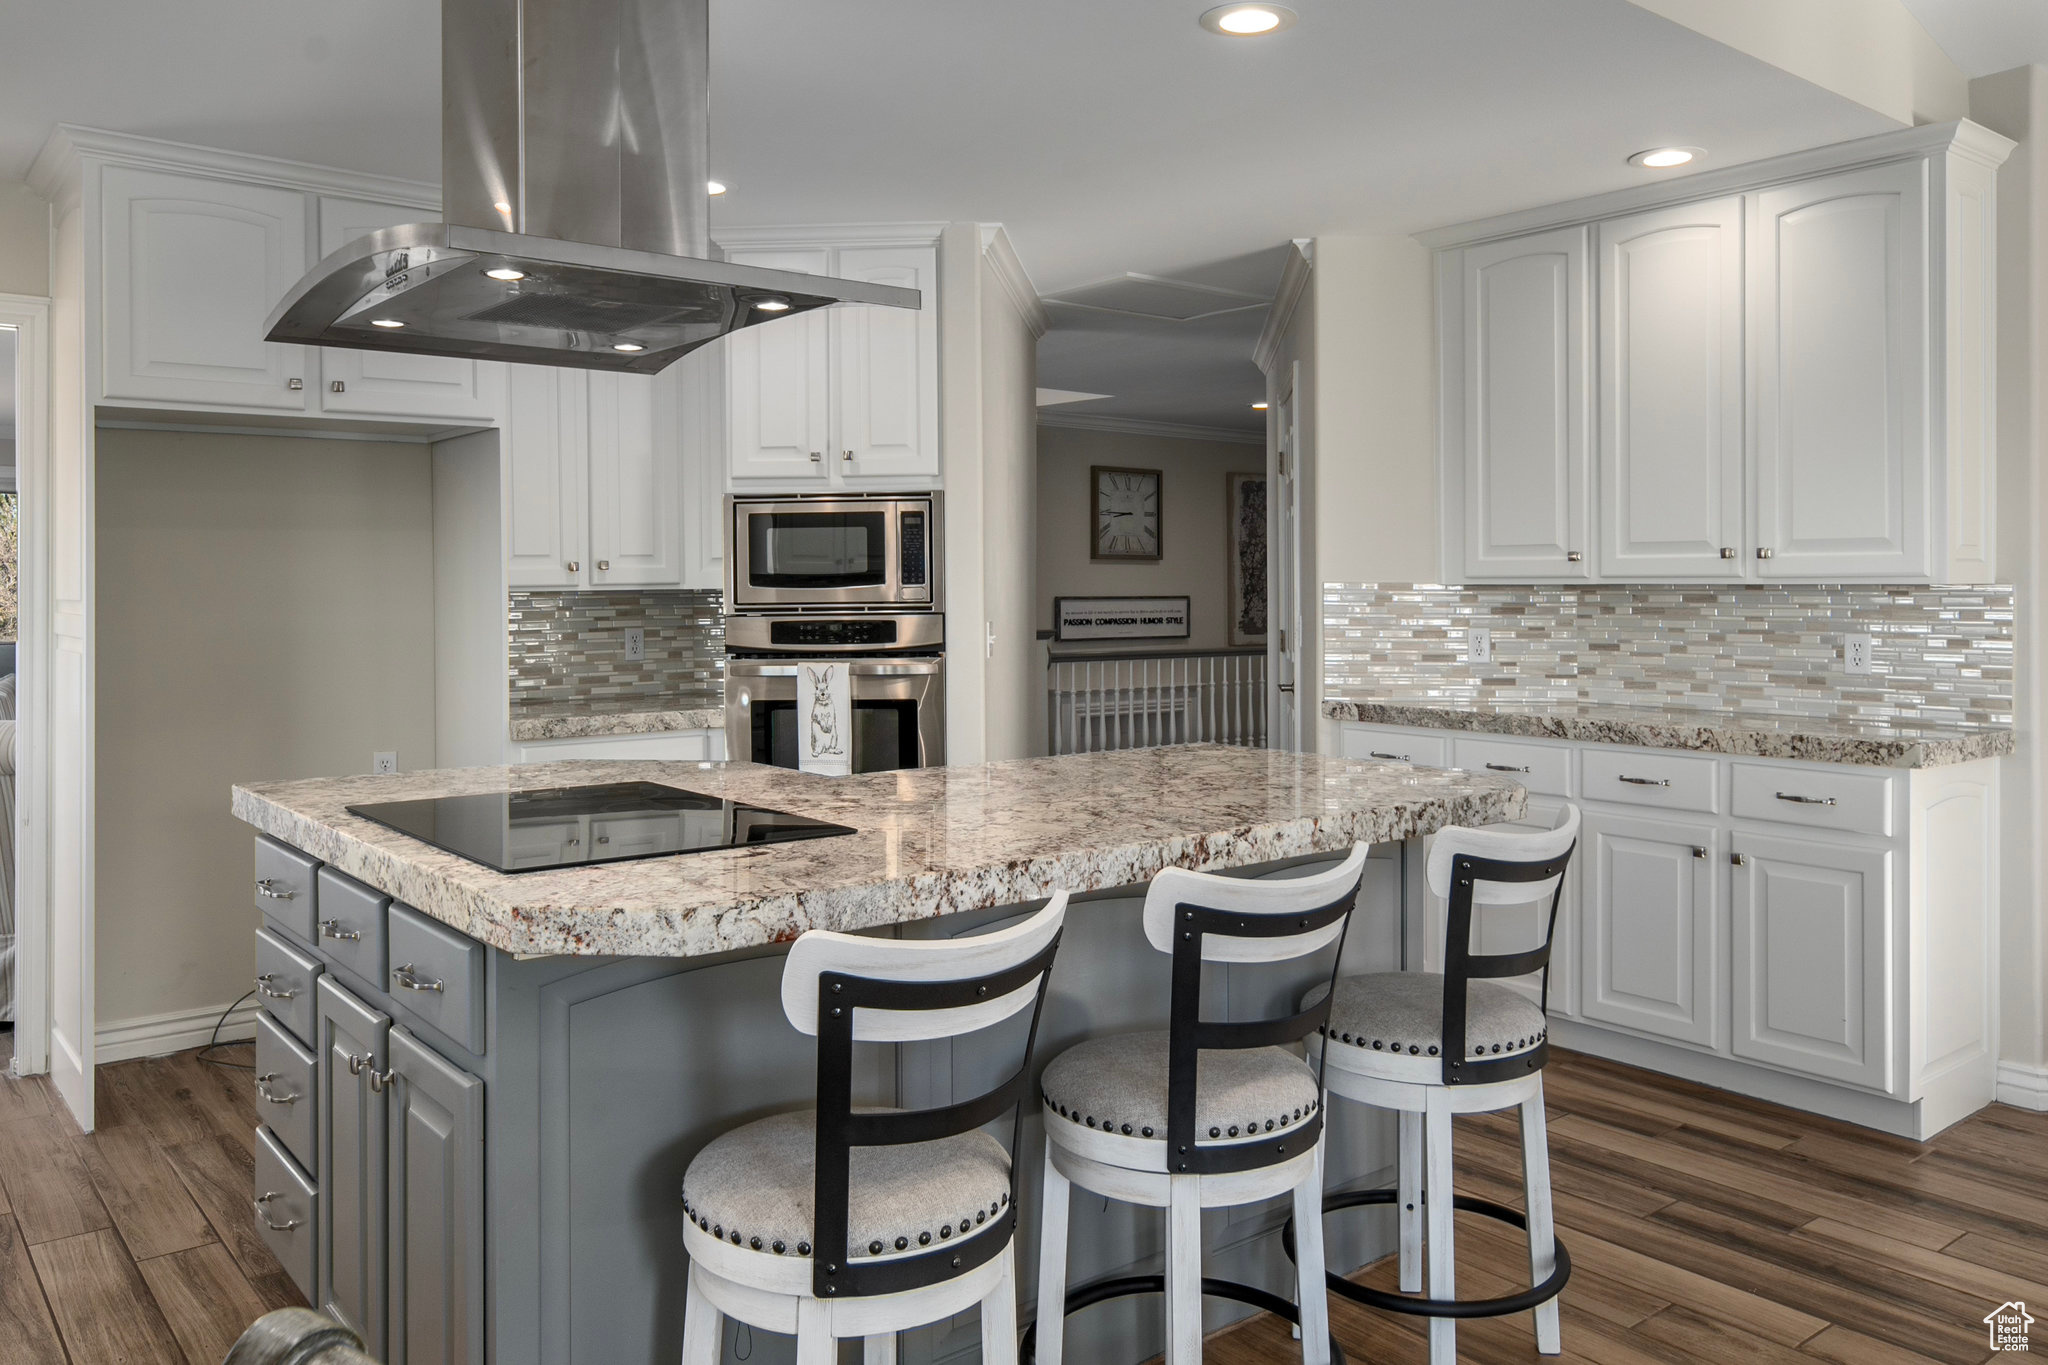 Kitchen featuring appliances with stainless steel finishes, gray cabinets, white cabinetry,  and island exhaust hood